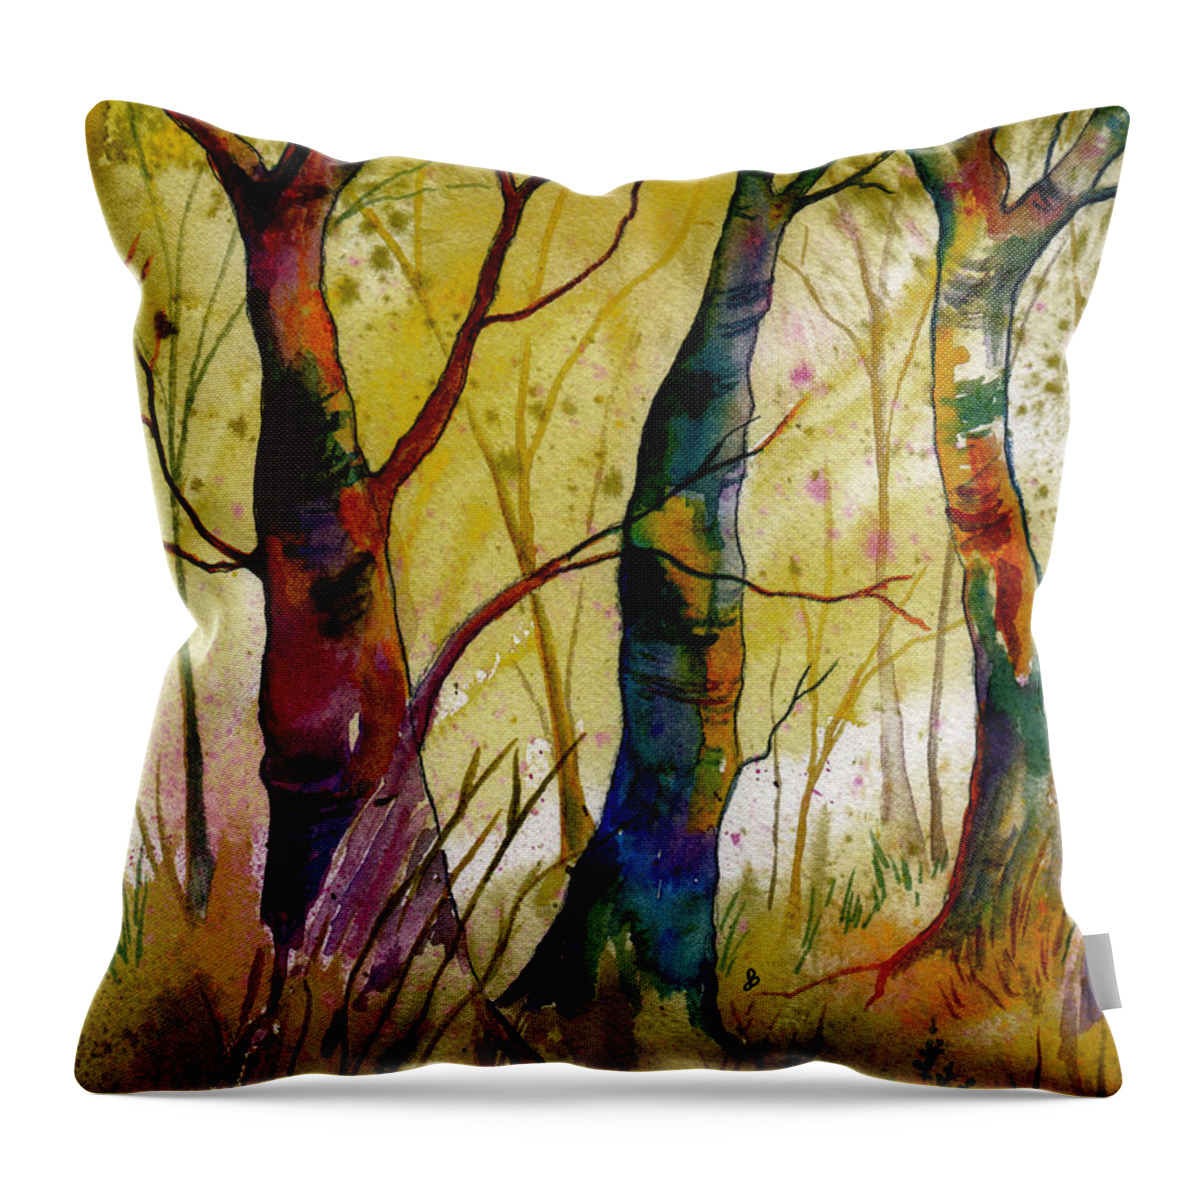 Landscape Throw Pillow featuring the painting Deep In The Woods by Brenda Owen